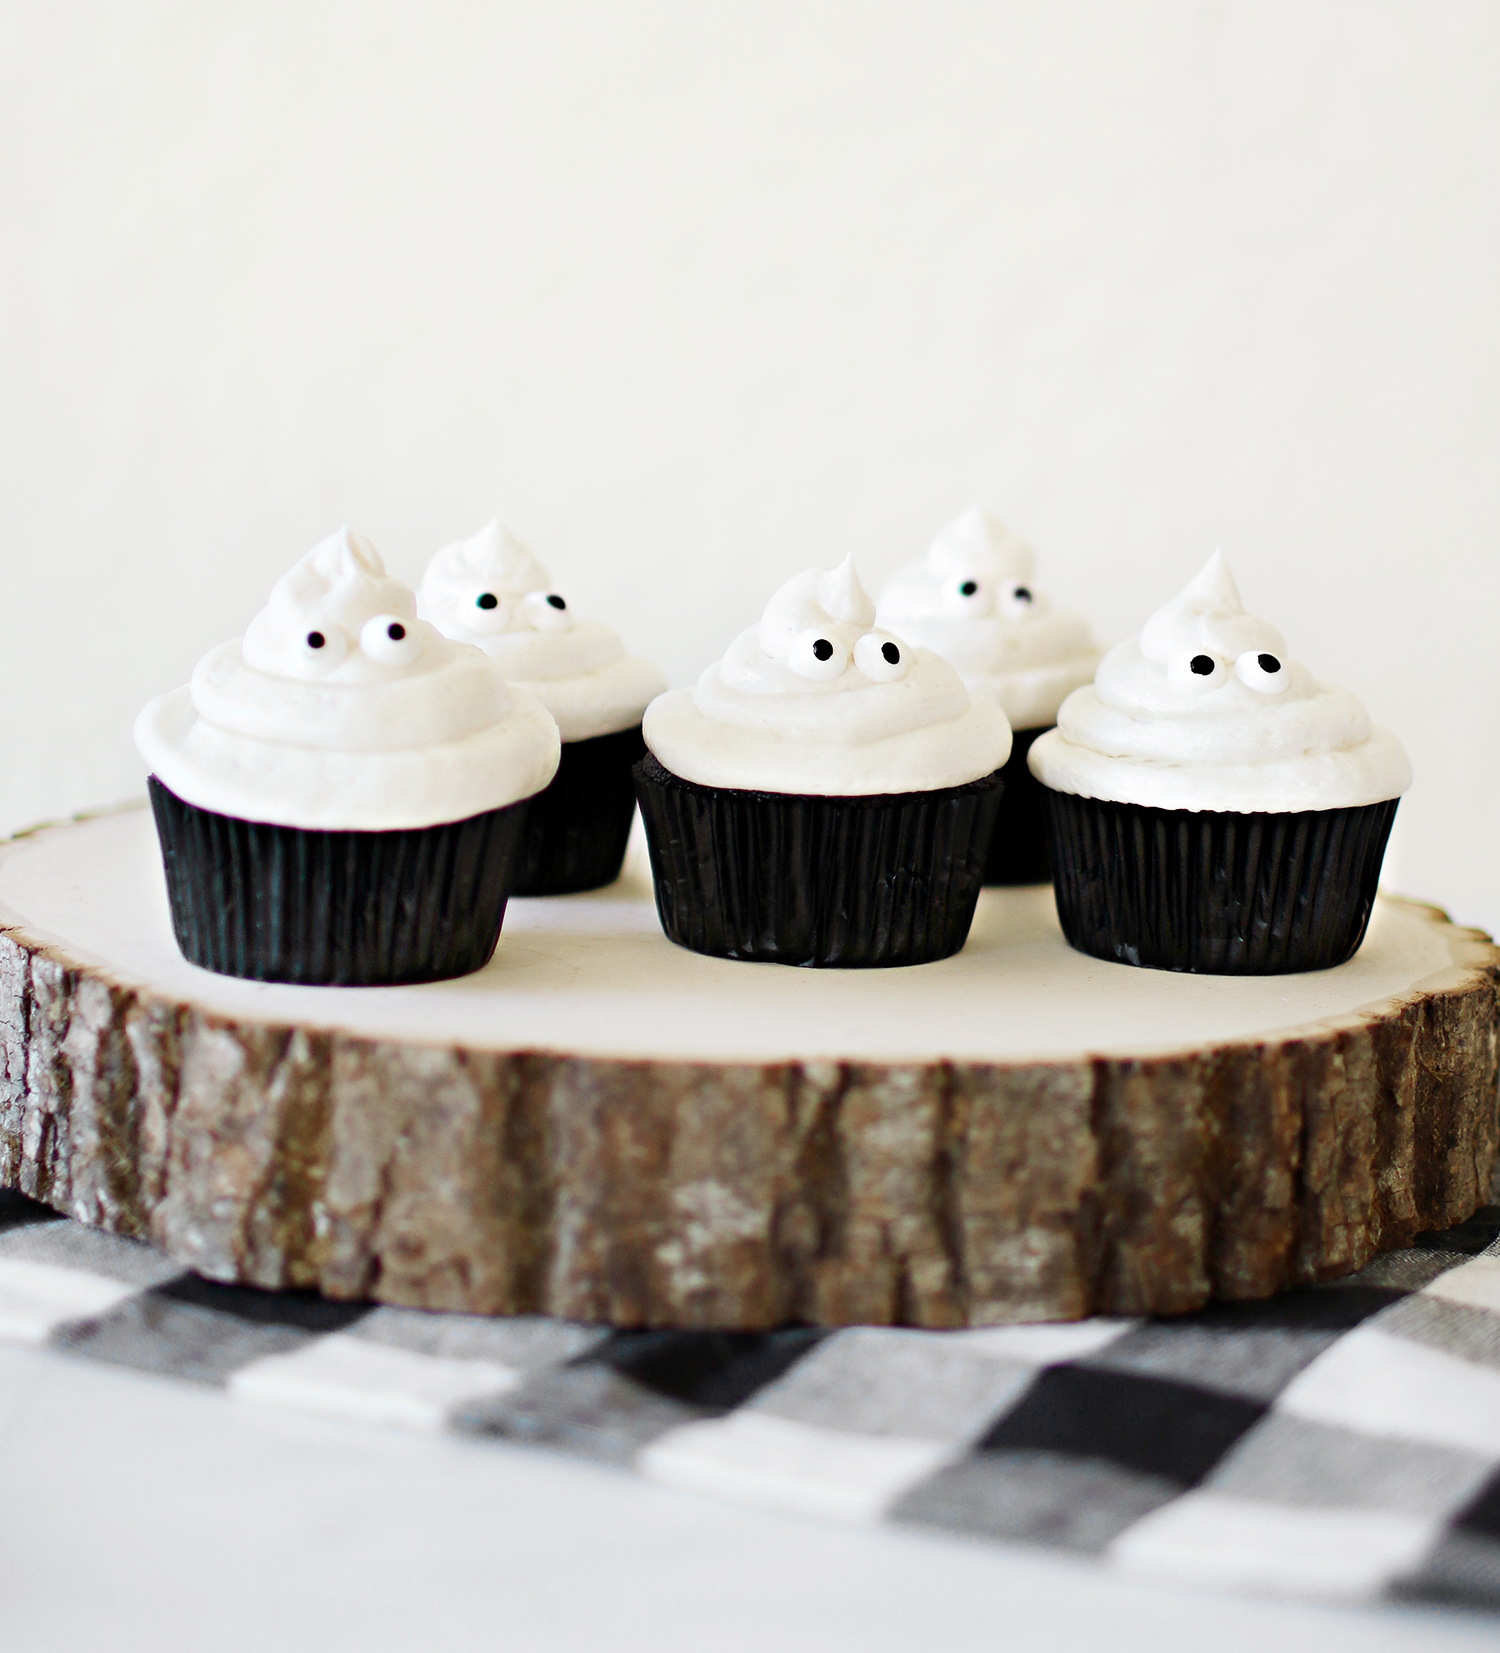 Black velvet and vanilla butter cream ghost cupcakes that our family loves to make for the Halloween festivities. Simple recipes and easy decorating make these cupcakes a hit for anyone who gets to make them. They are also delicious for all who get to enjoy them. Catch the entire recipe for our Ghost in the Graveyard cupcakes over at Haus of Layne! #HalloweenFood #HalloweenRecipe #HalloweenFoodIdeas #HalloweenTreats #Cupcakes #CupcakeRecipe #ButtercreamFrosting #BlackVelvetCake